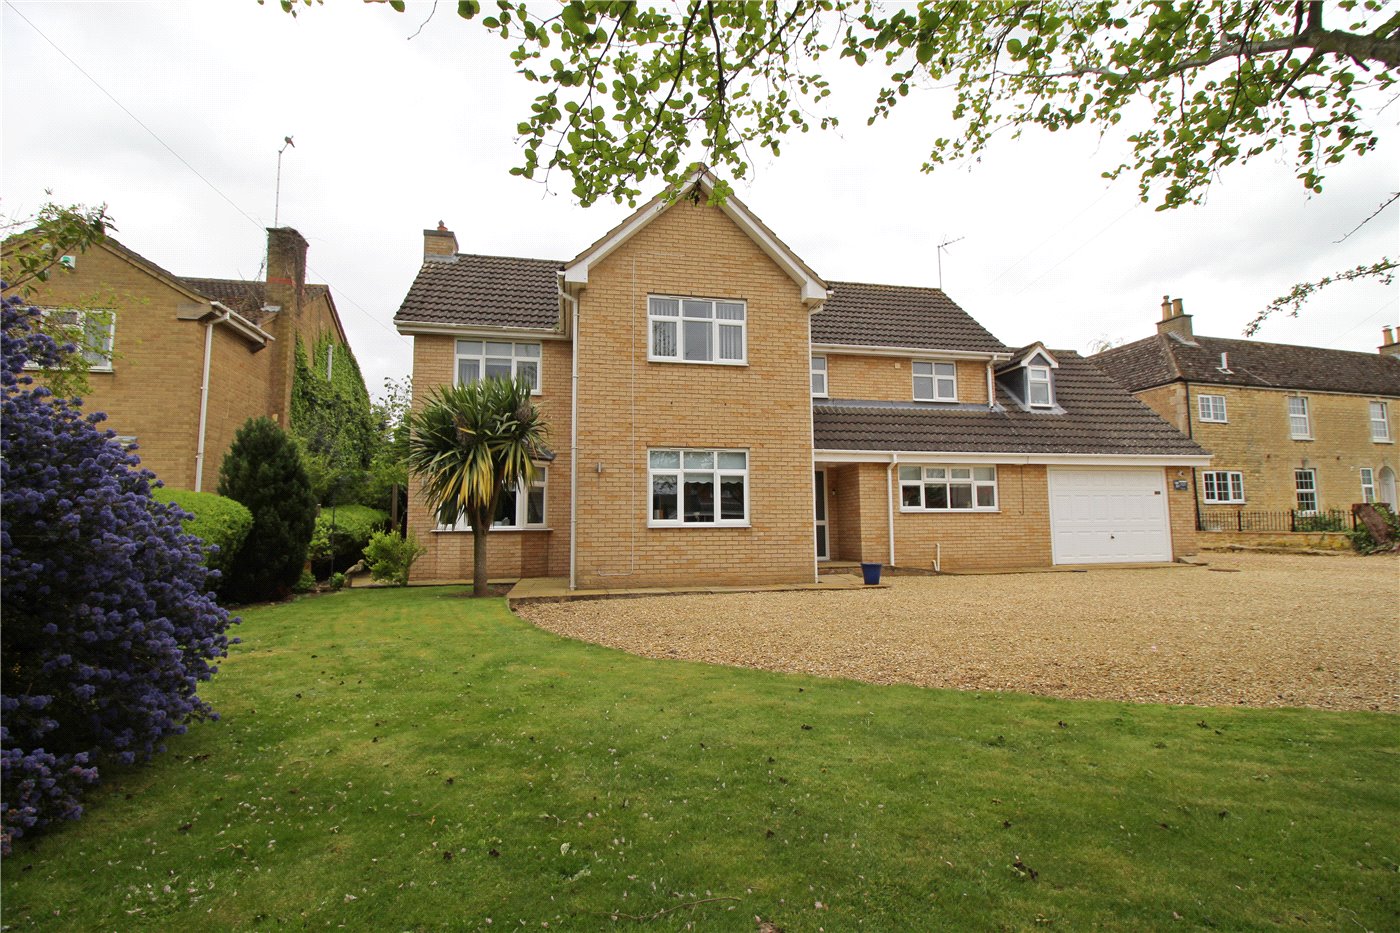 Horsegate, Deeping St. James, Peterborough, Lincolnshire, PE6 4 bedroom house in Deeping St. James